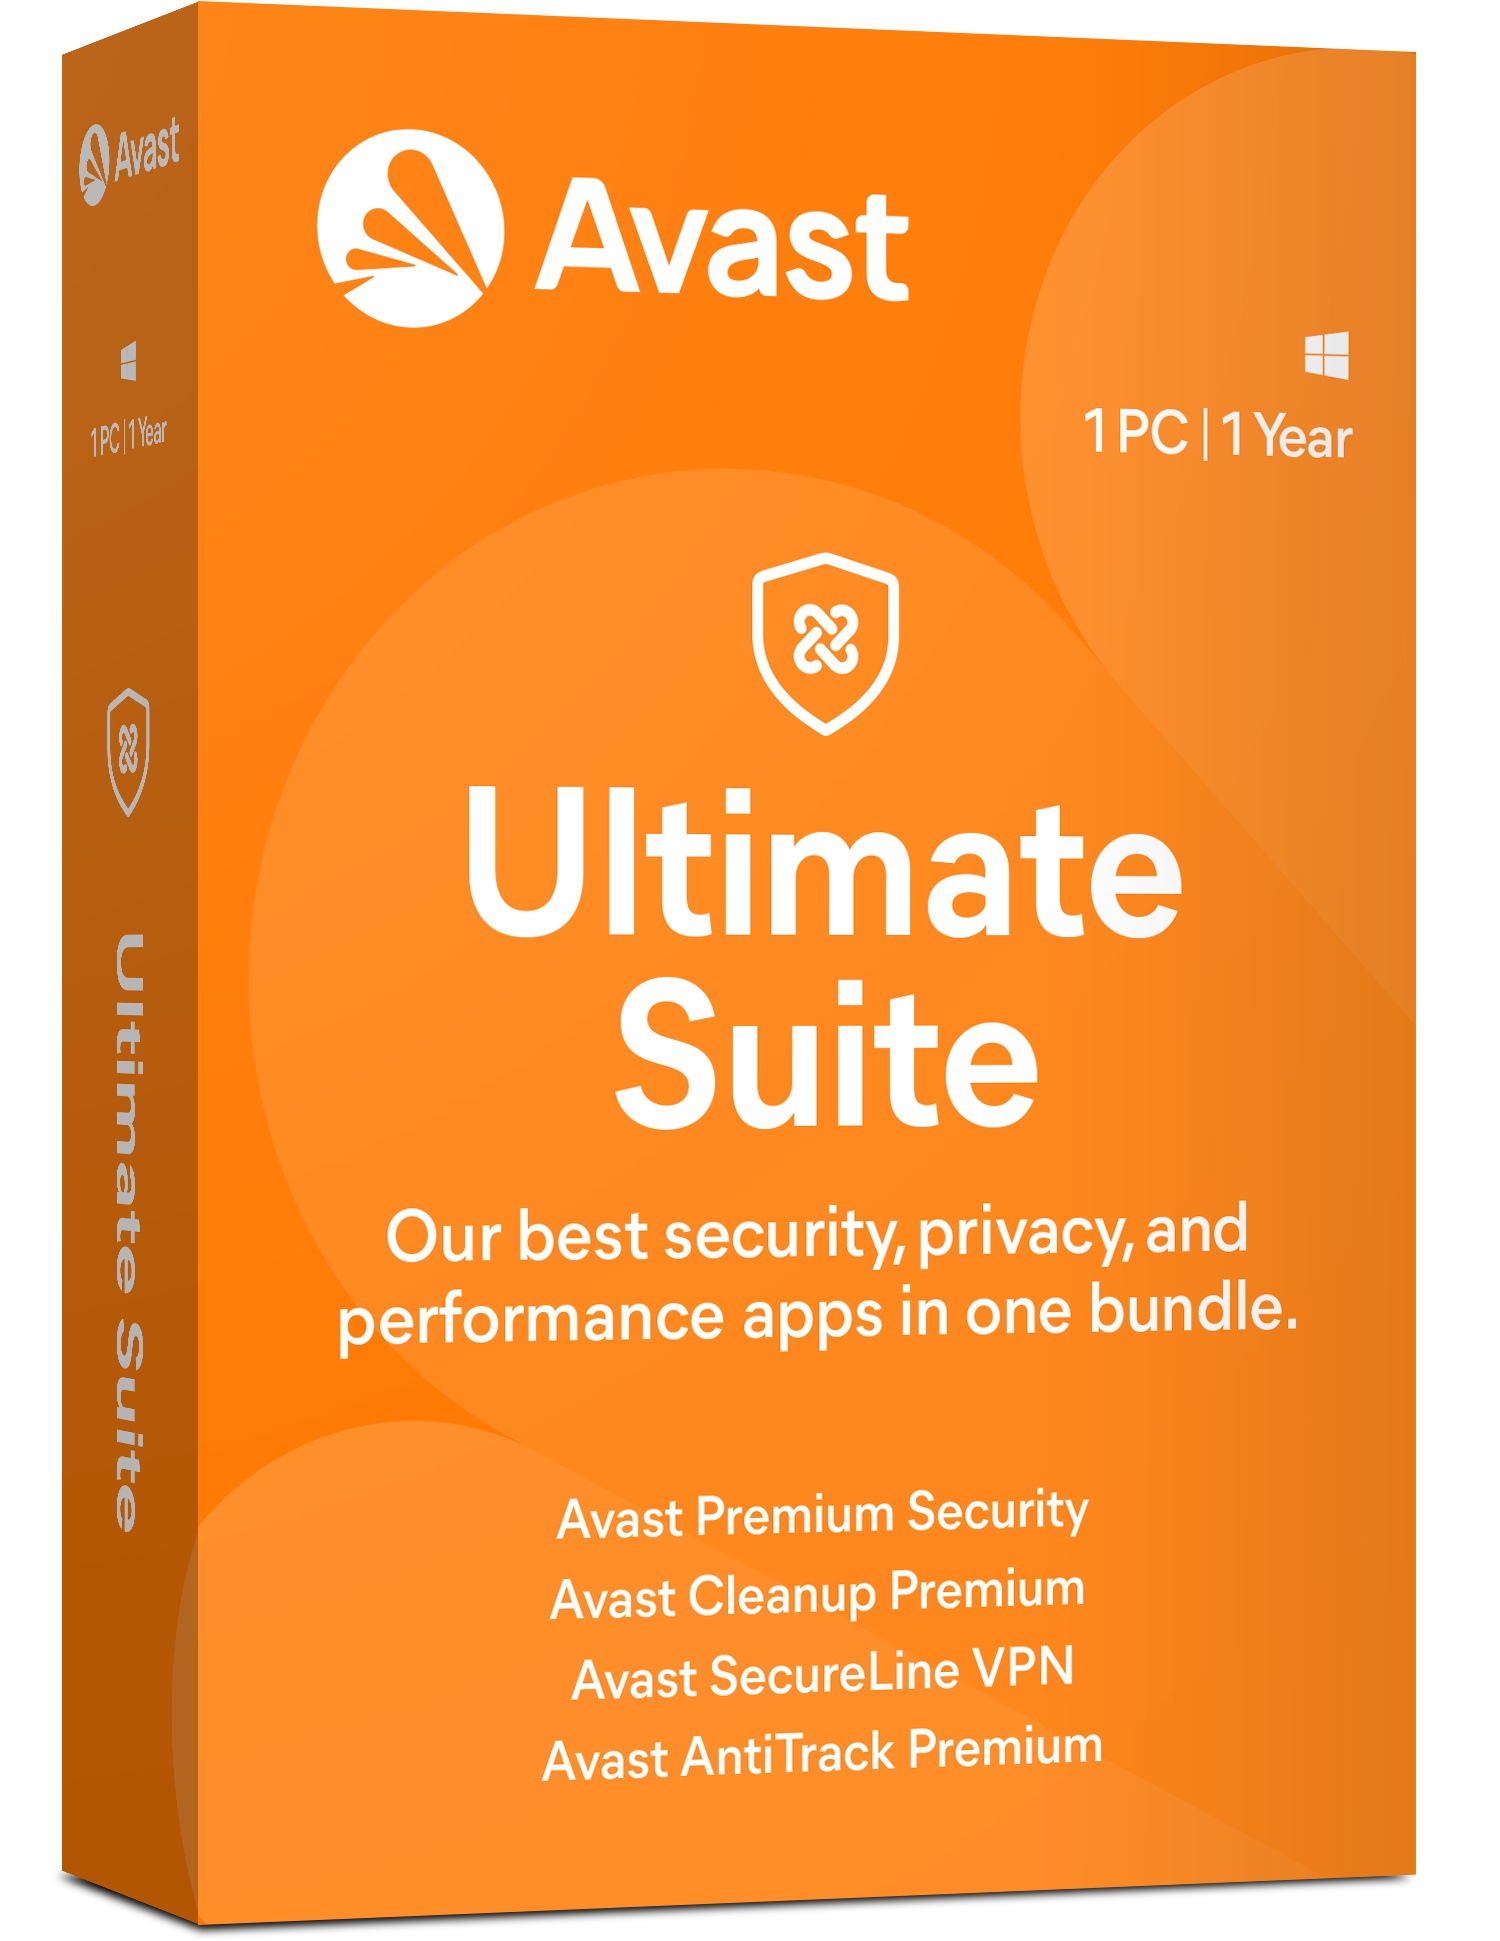 Renew AVAST Ultimate for Windows- 1 PC 1Y